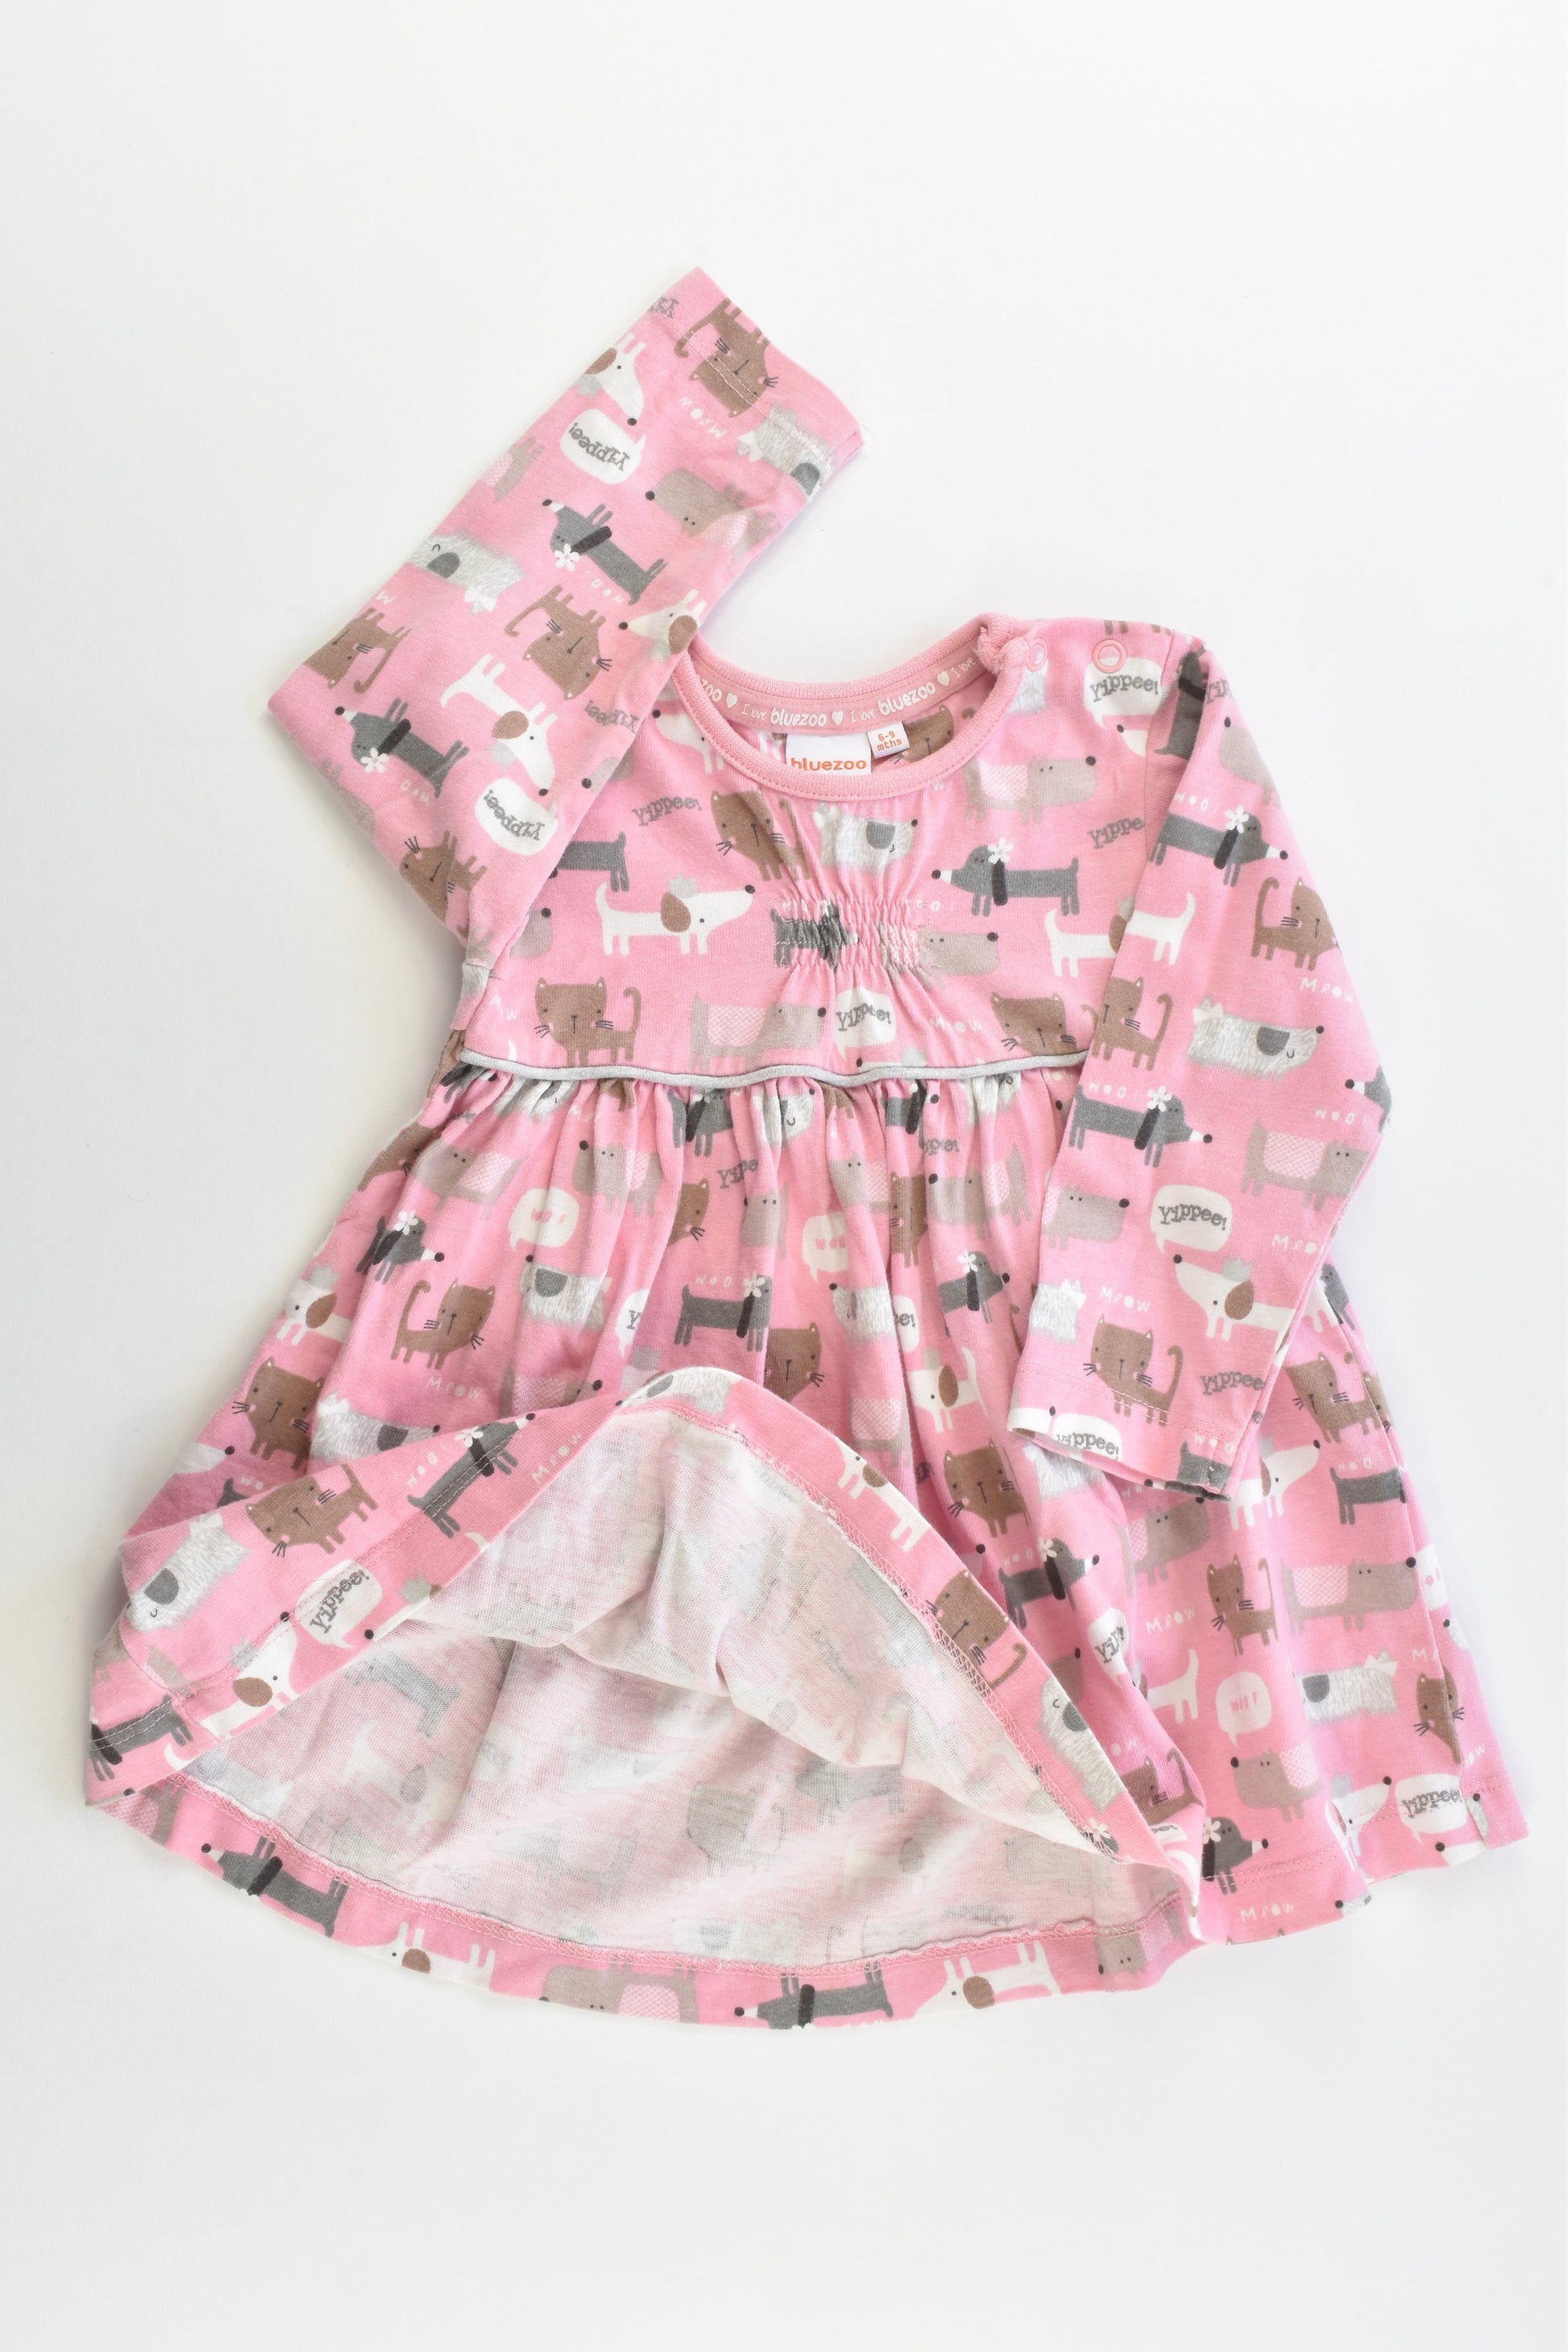 Bluezoo (Debenhams) Size 0 (74 cm, 6-9 months) Cats and Dogs Dress